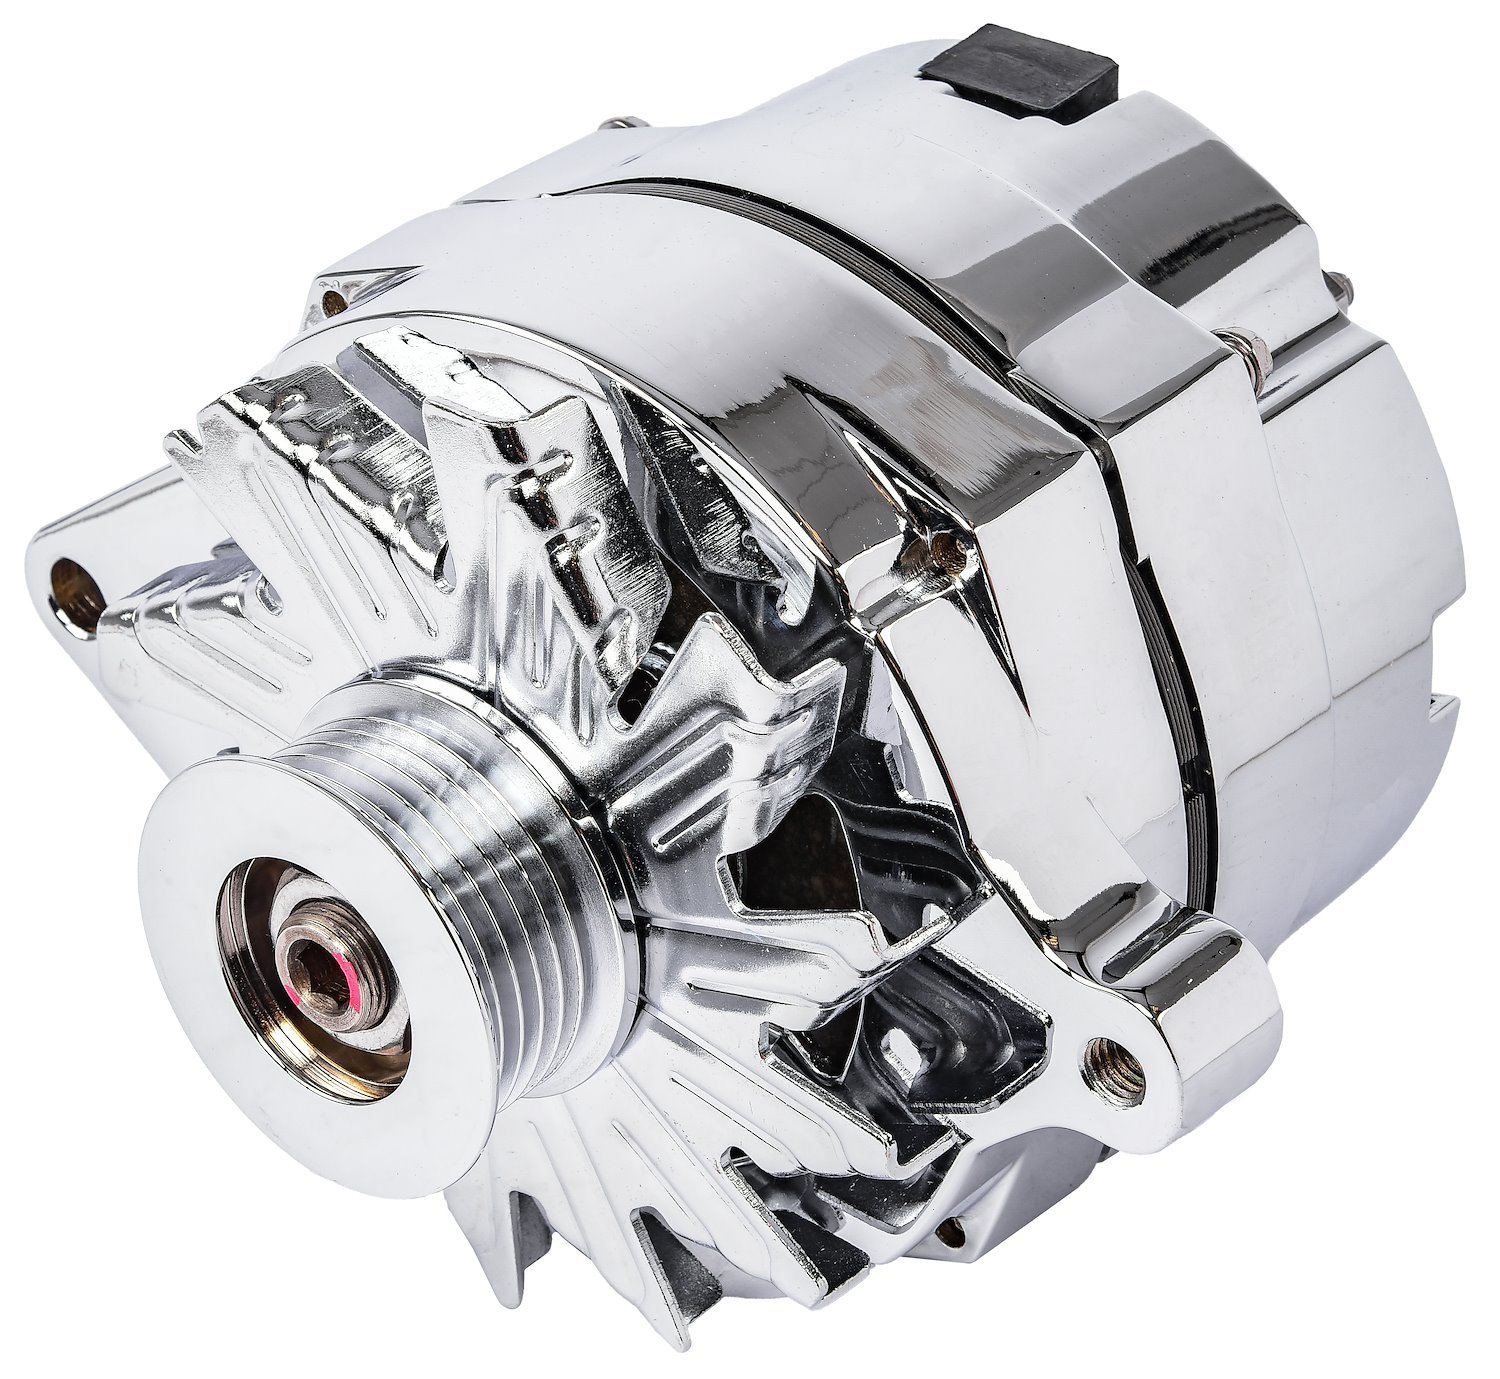 Ford 1-Wire Alternator, 100 amp Output with Serpentine Belt Pulley [Chrome Plated Finish]